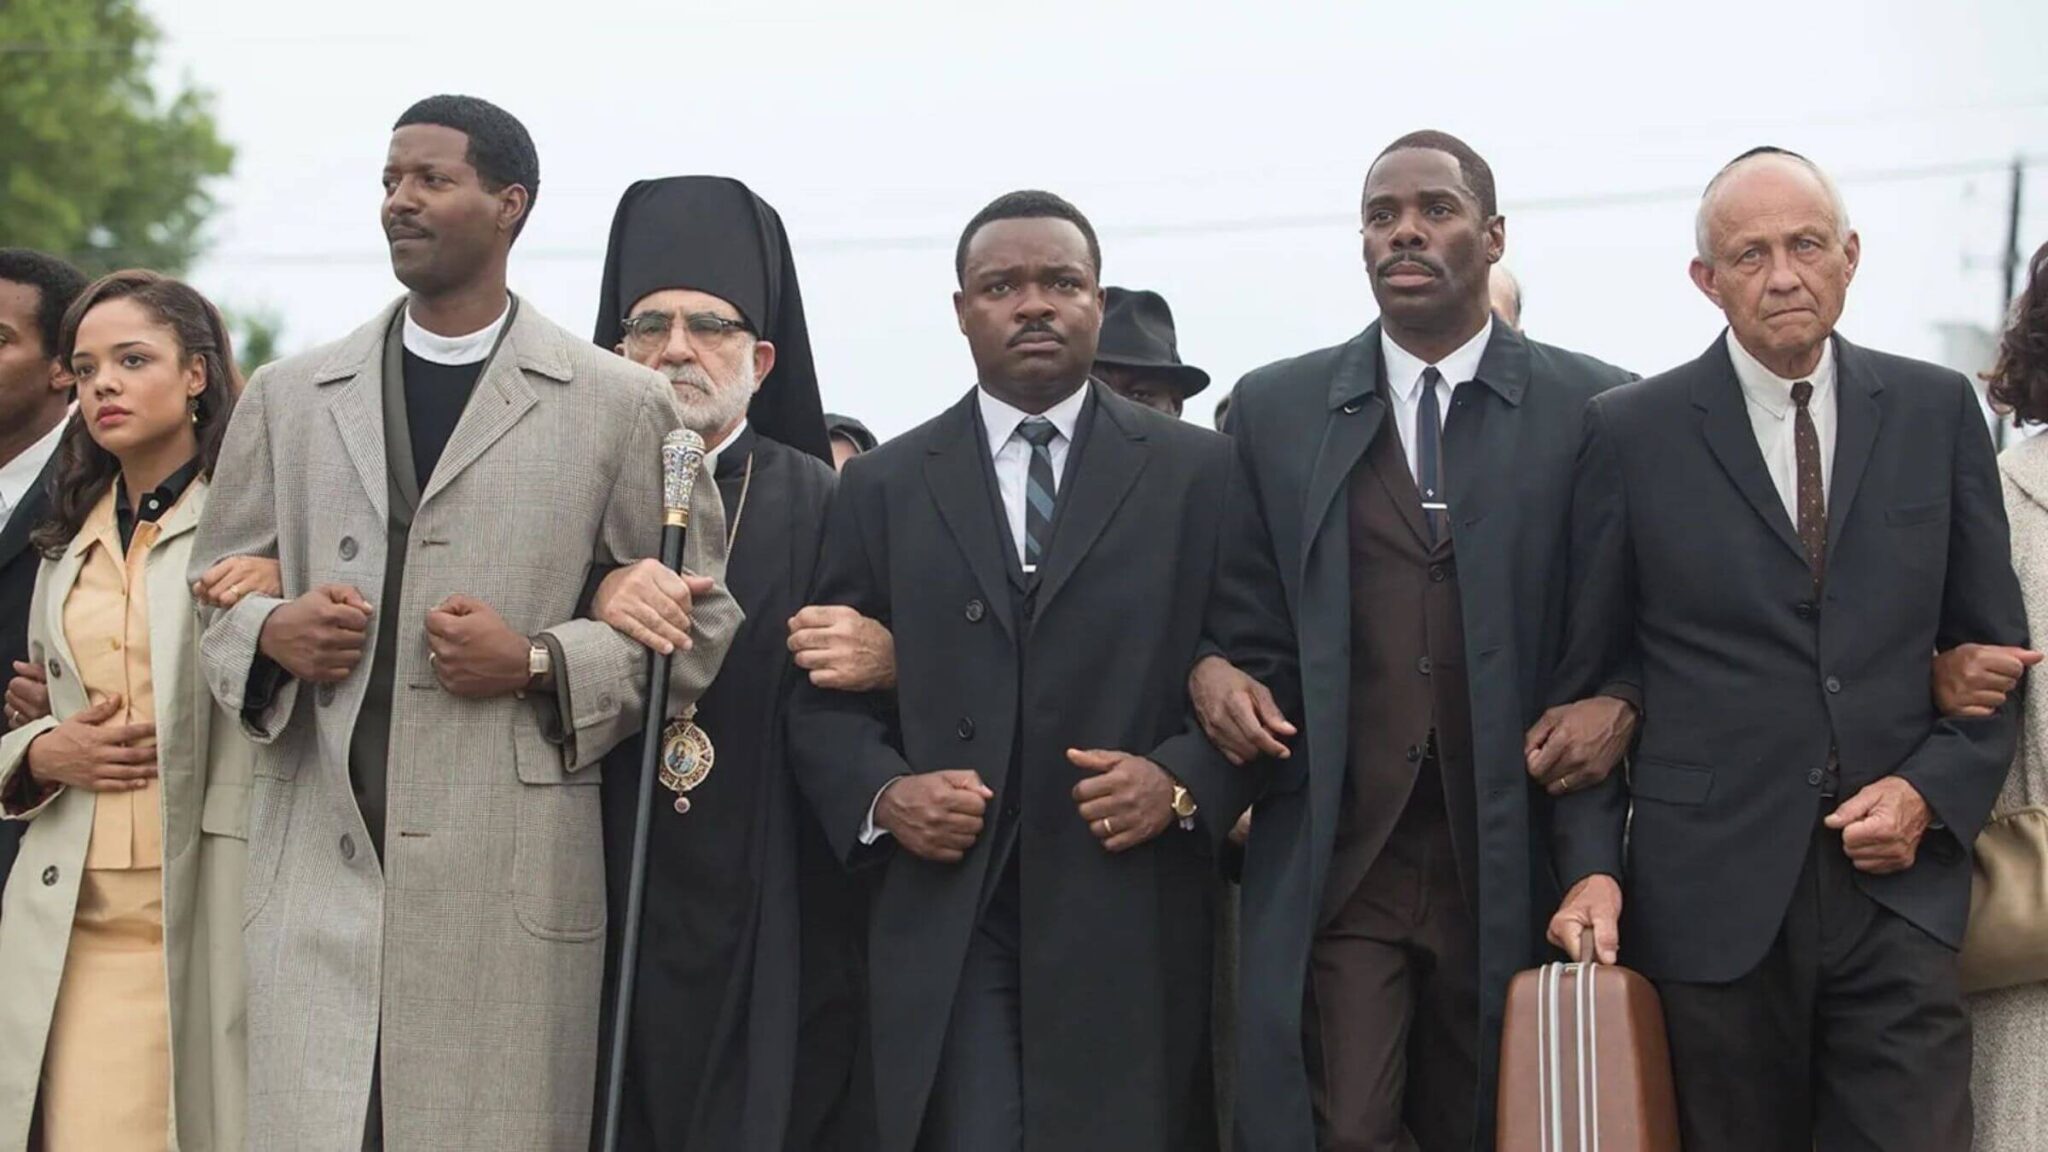 Remembering the Dream: 10 Civil Rights Movies You Should Watch